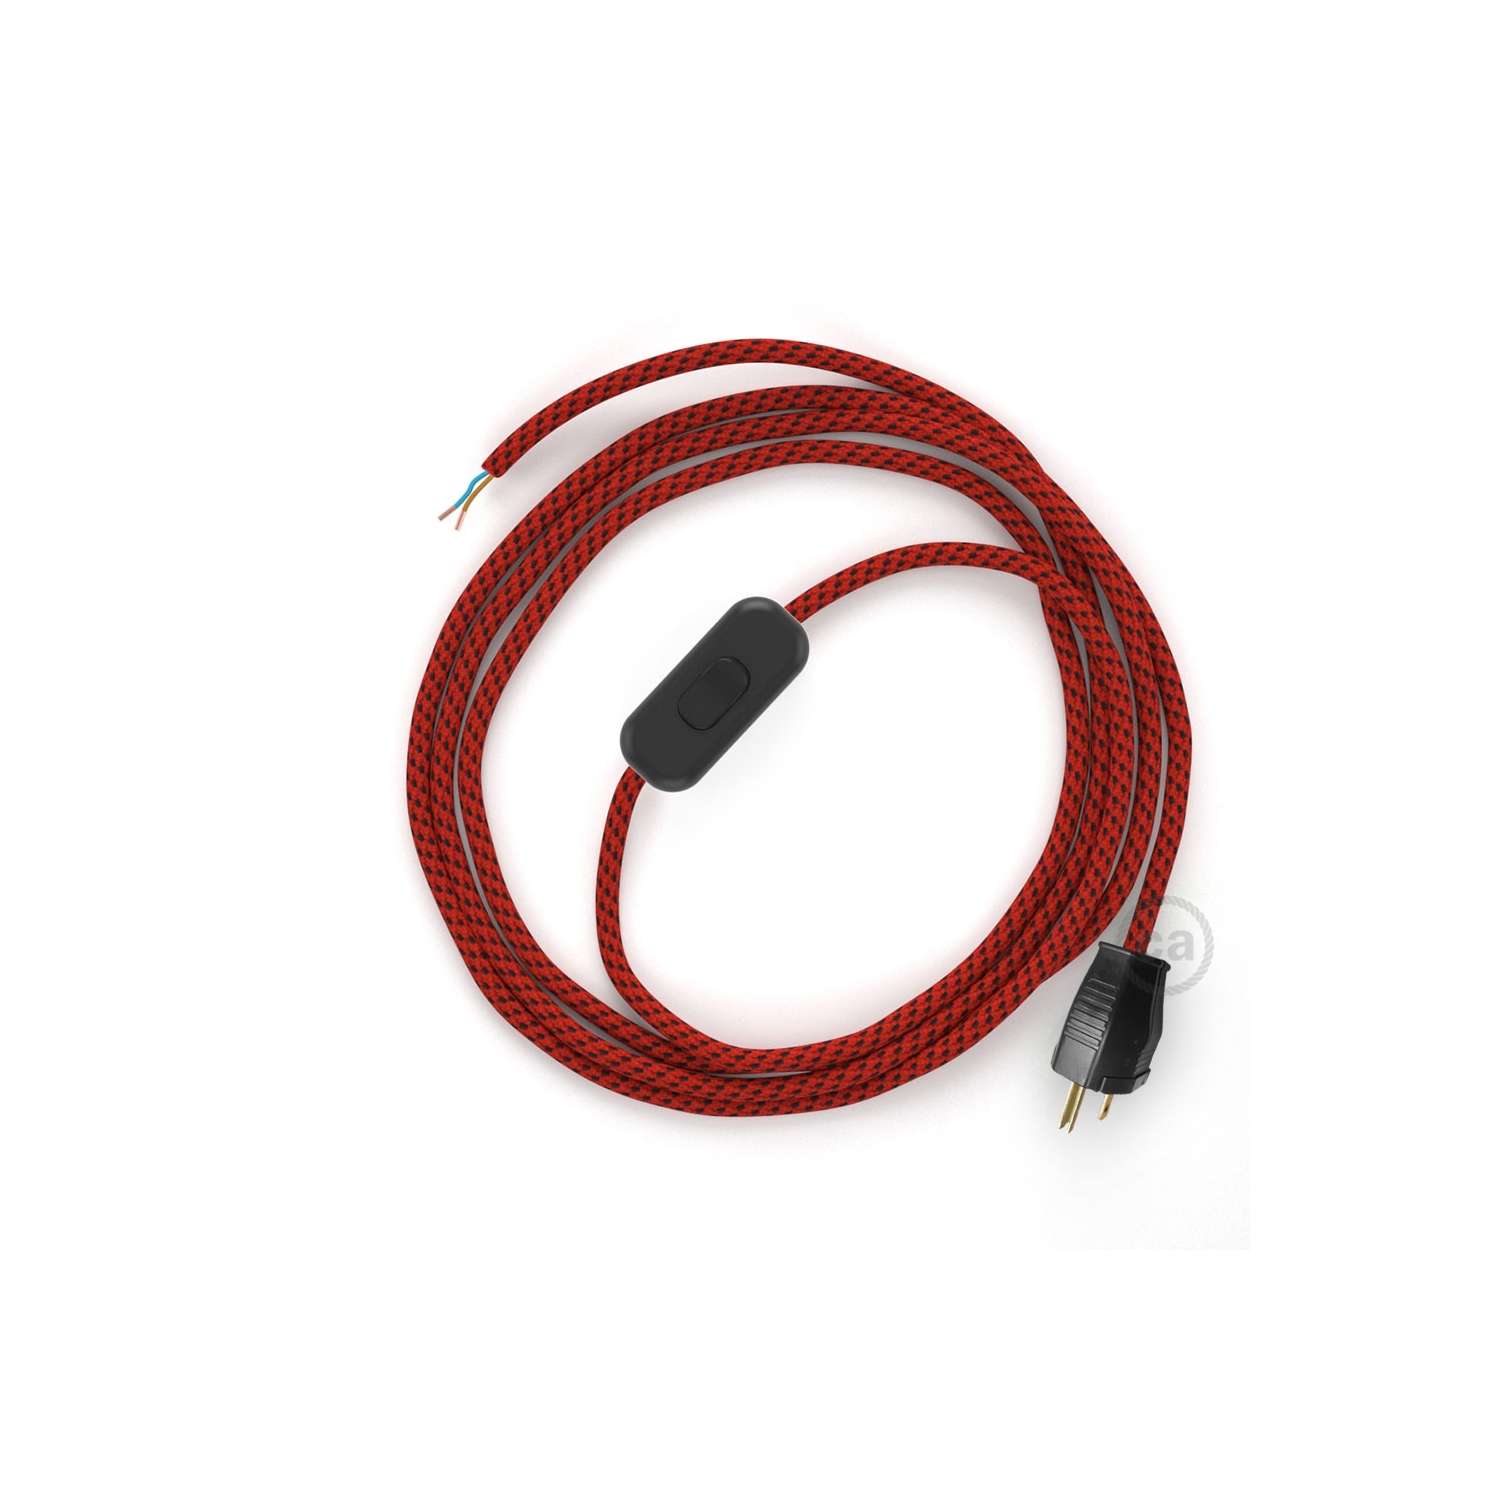 Power Cord with in-line switch, RT94 Red & Black Tracer - Choose color of switch/plug